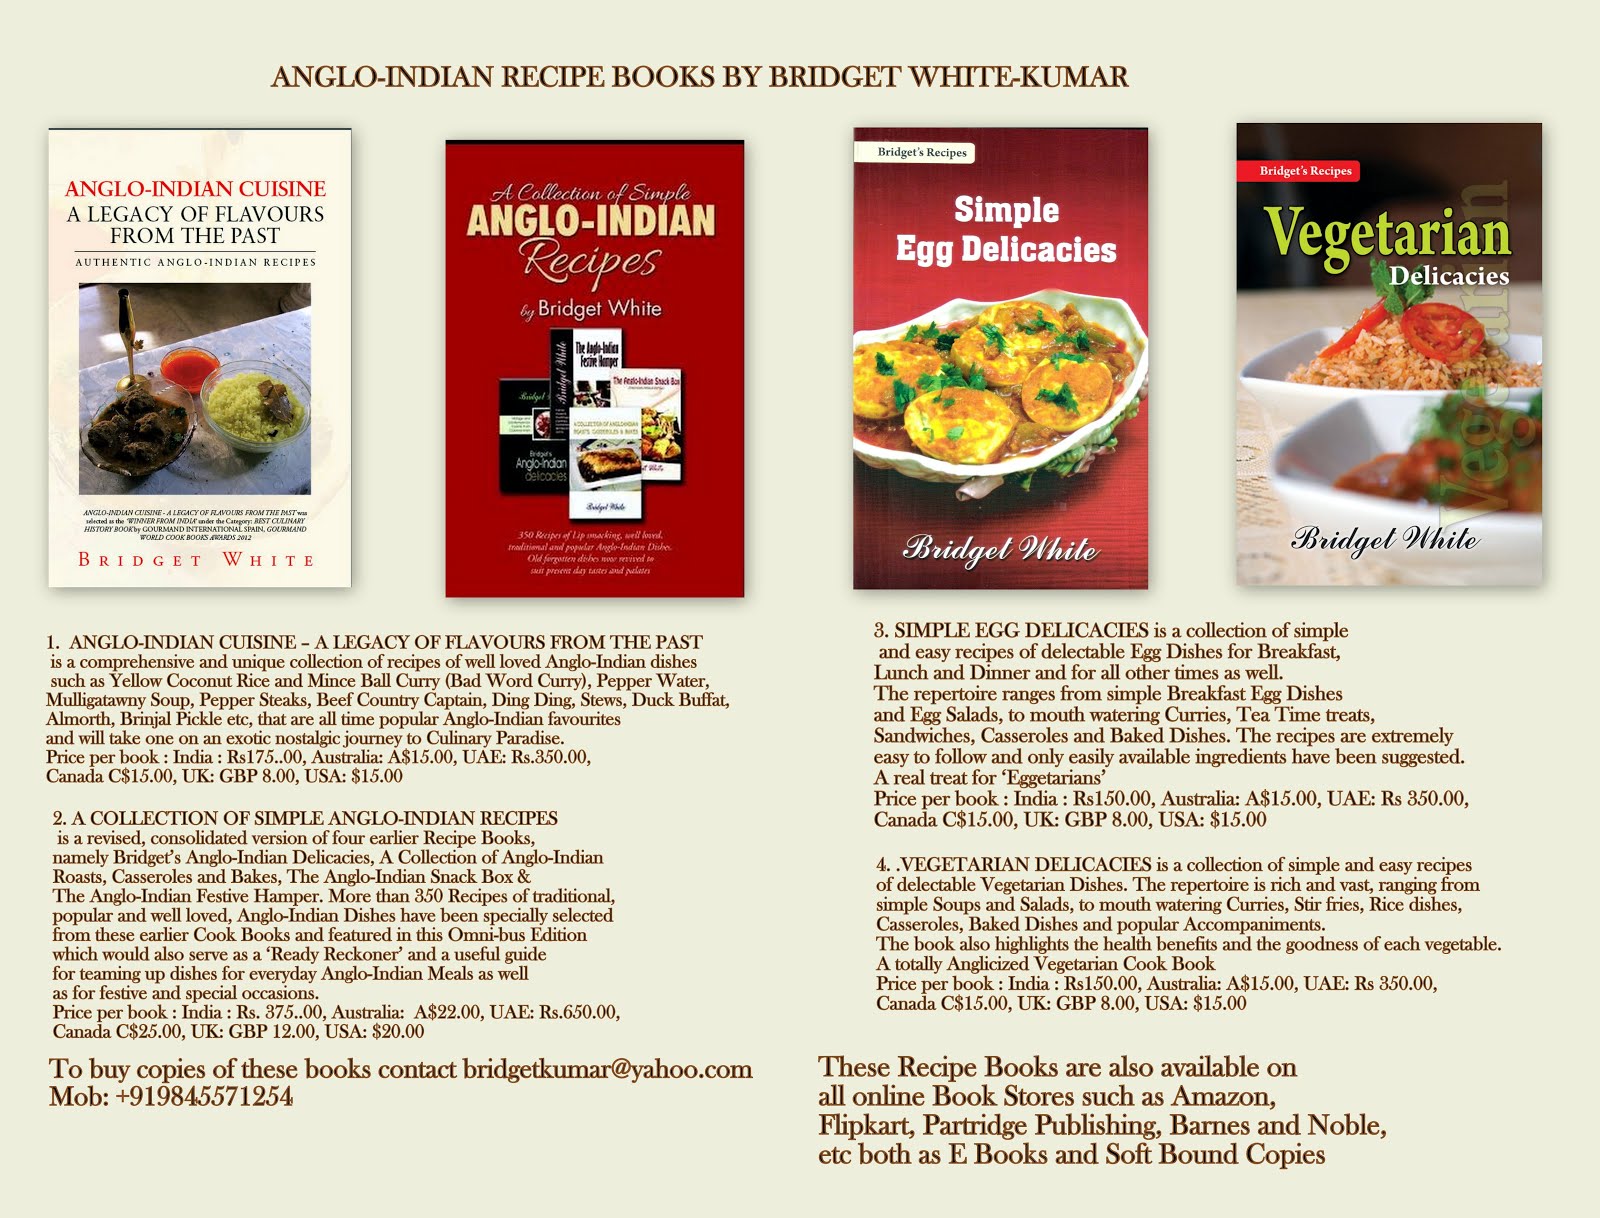 My Anglo-Indian Recipe Books